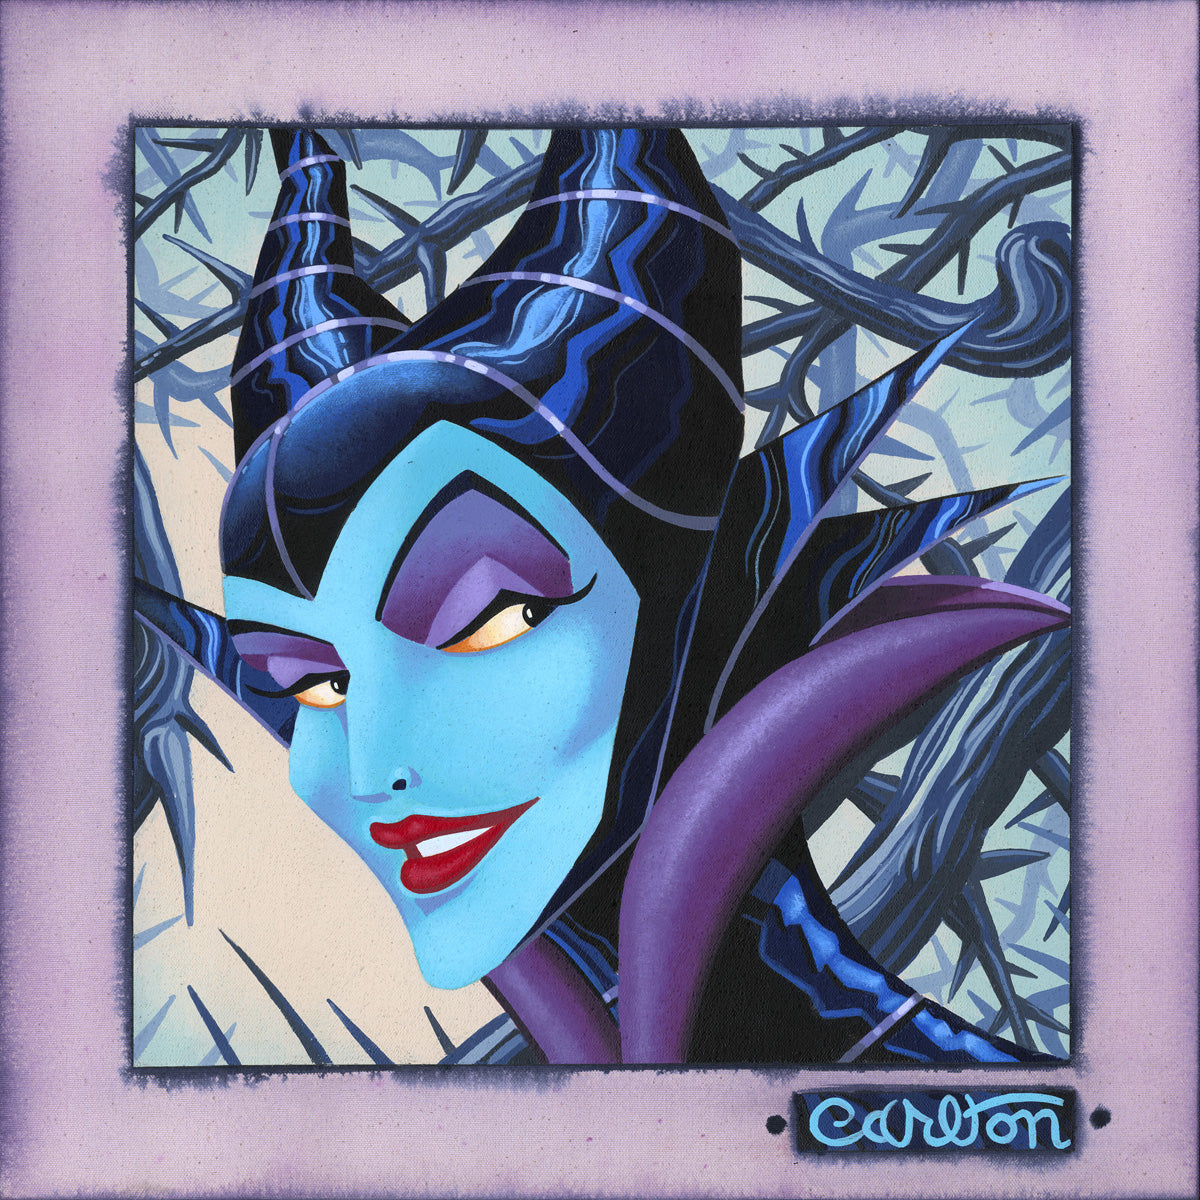 Trevor Carlton Disney "Twisted and Evil" Limited Edition Canvas Giclee